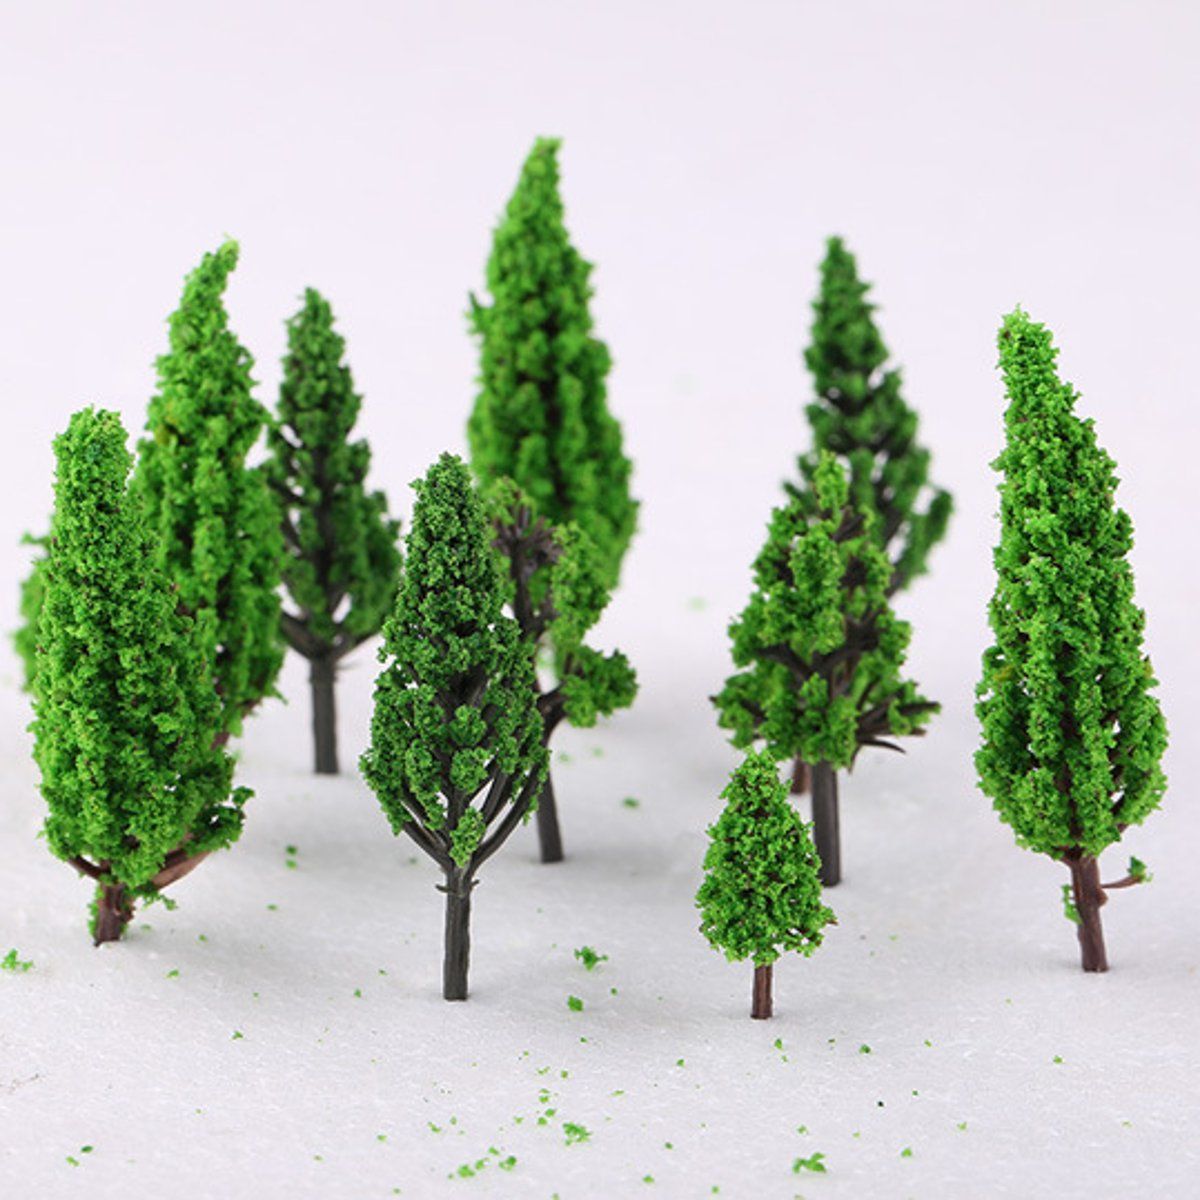 253050Pcs-Model-Tree-Set-Sand-Table-Decorations-Layout-Railway-Road-Scenery--Landscaping-1665944